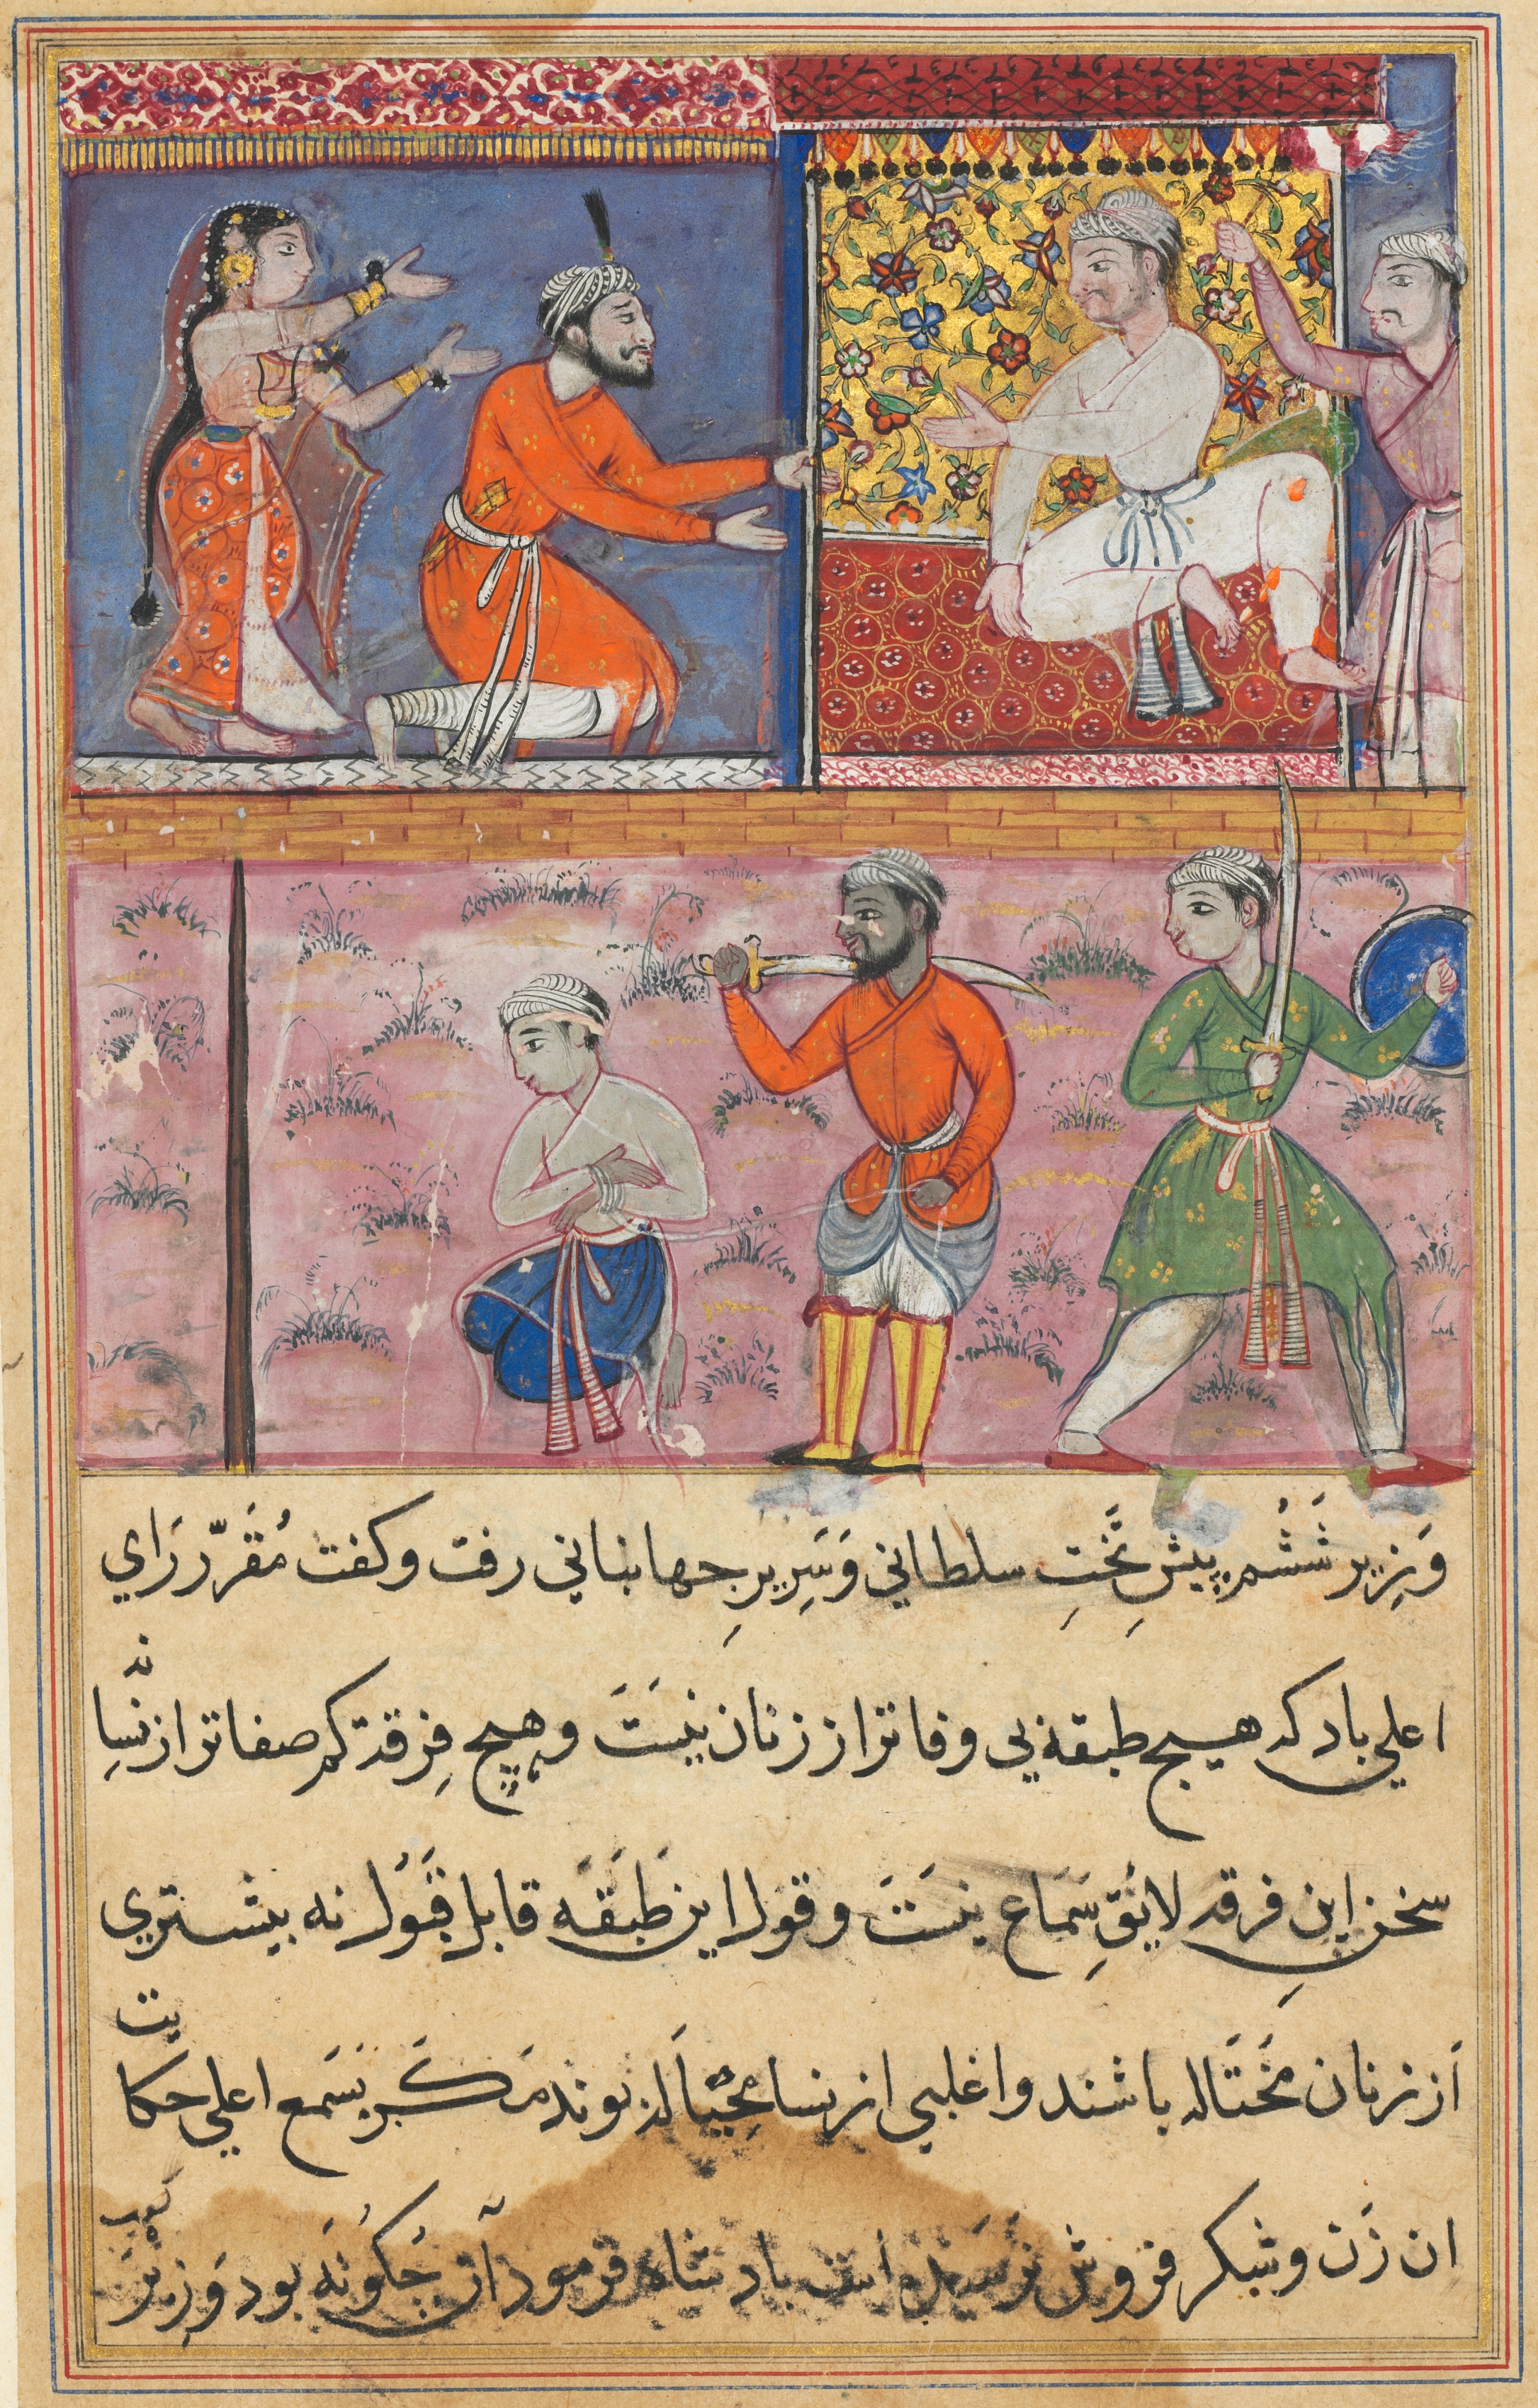 The prince sent back to the place of execution for the sixth time, from a Tuti-nama (Tales of a Parrot): Eighth Night